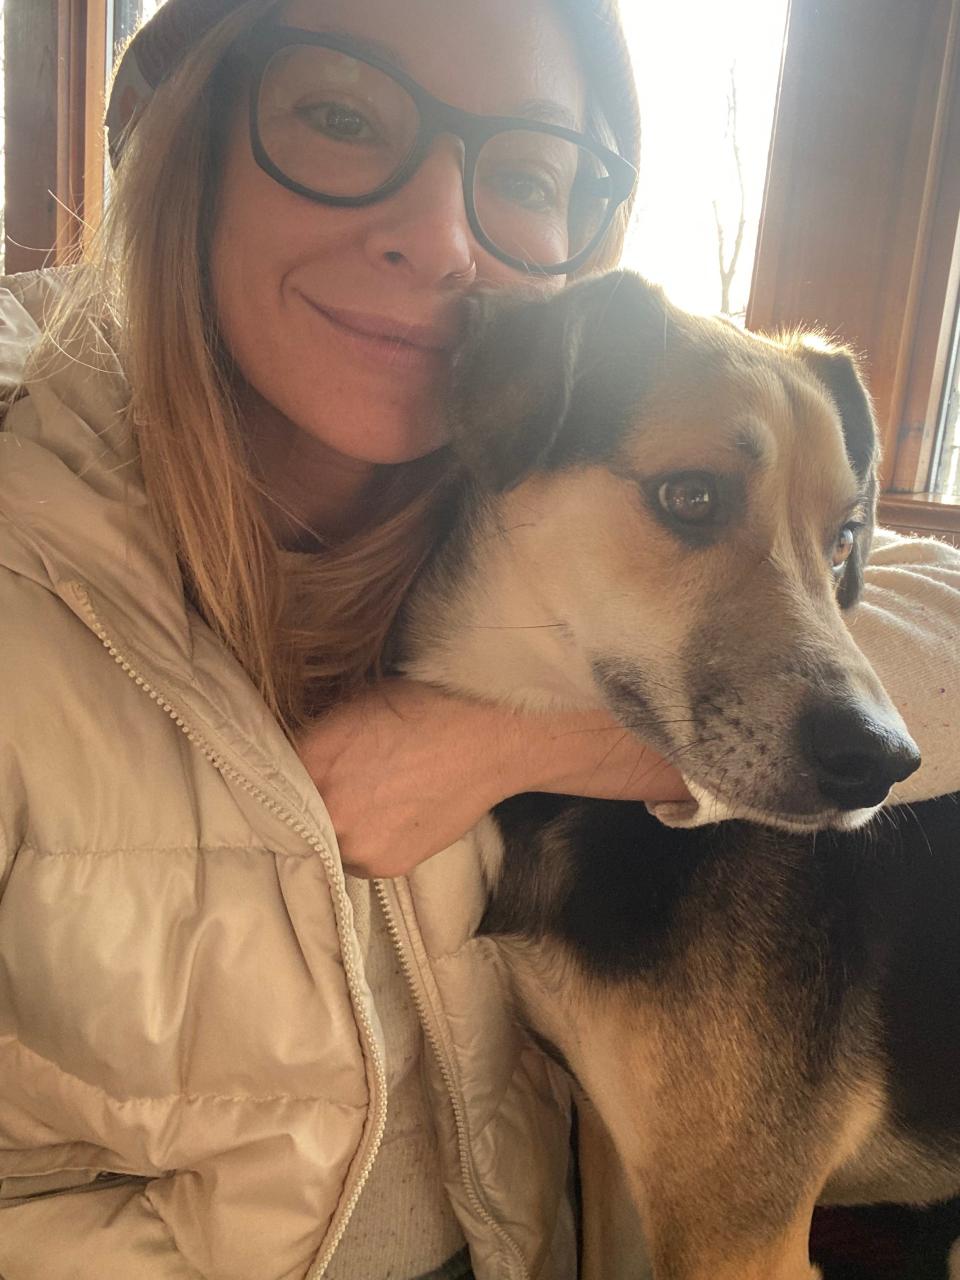 The author and her dog, Frankie.